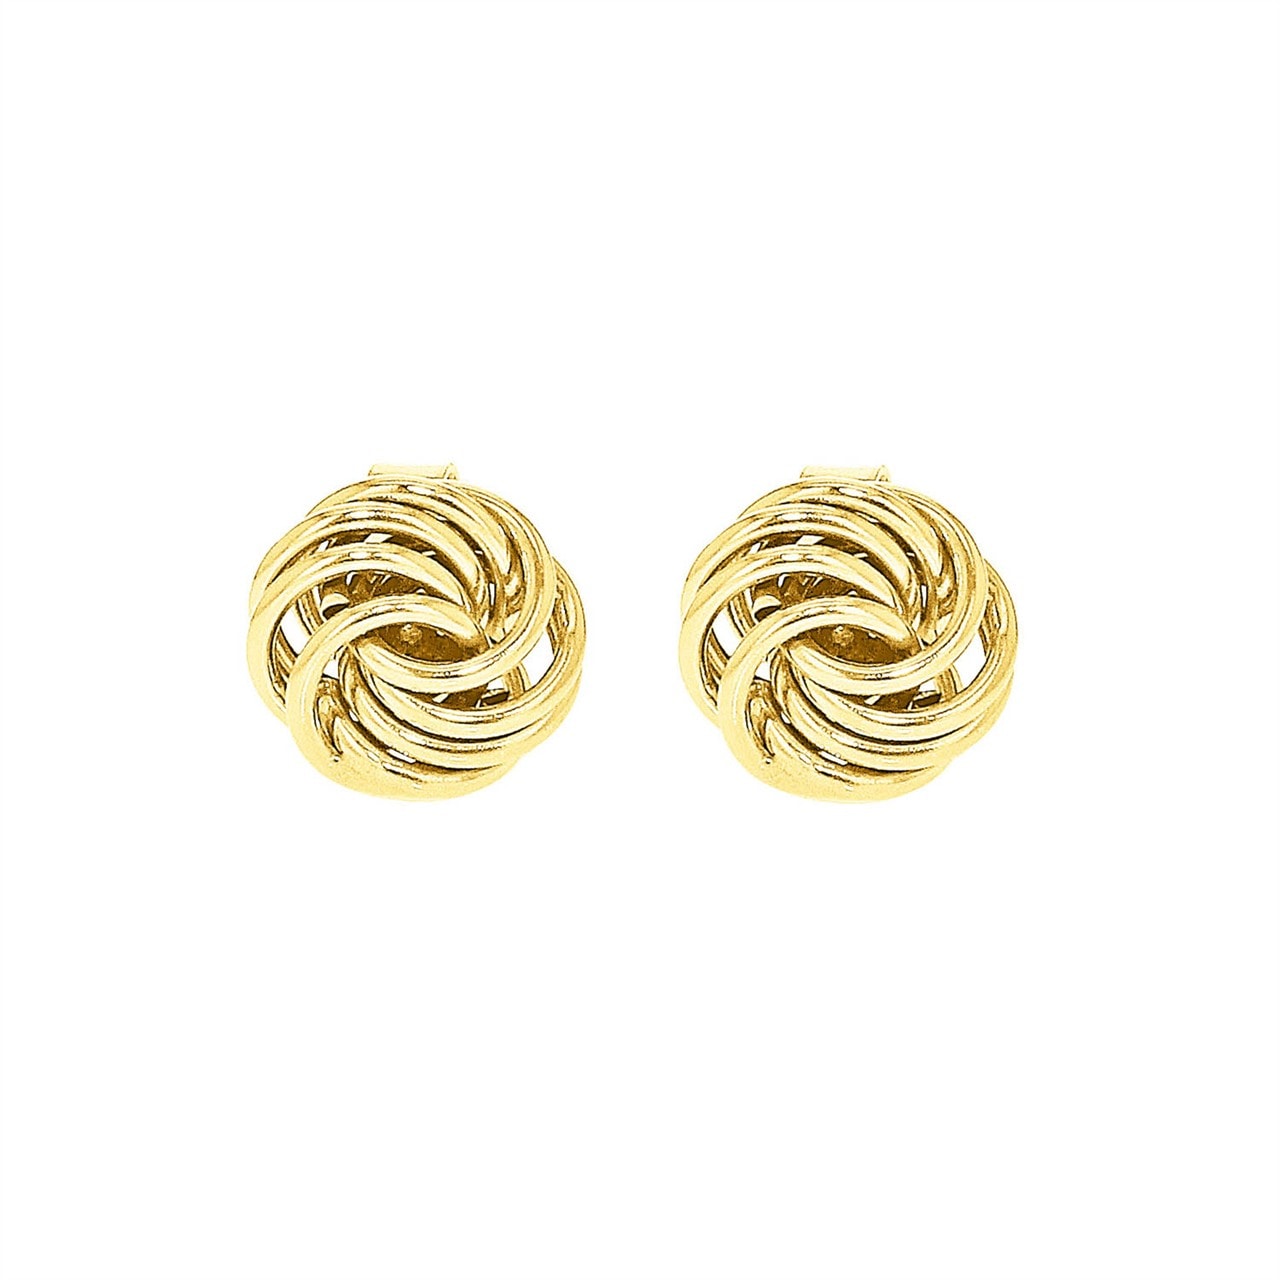 9ct Gold Knot stud Earrings_0